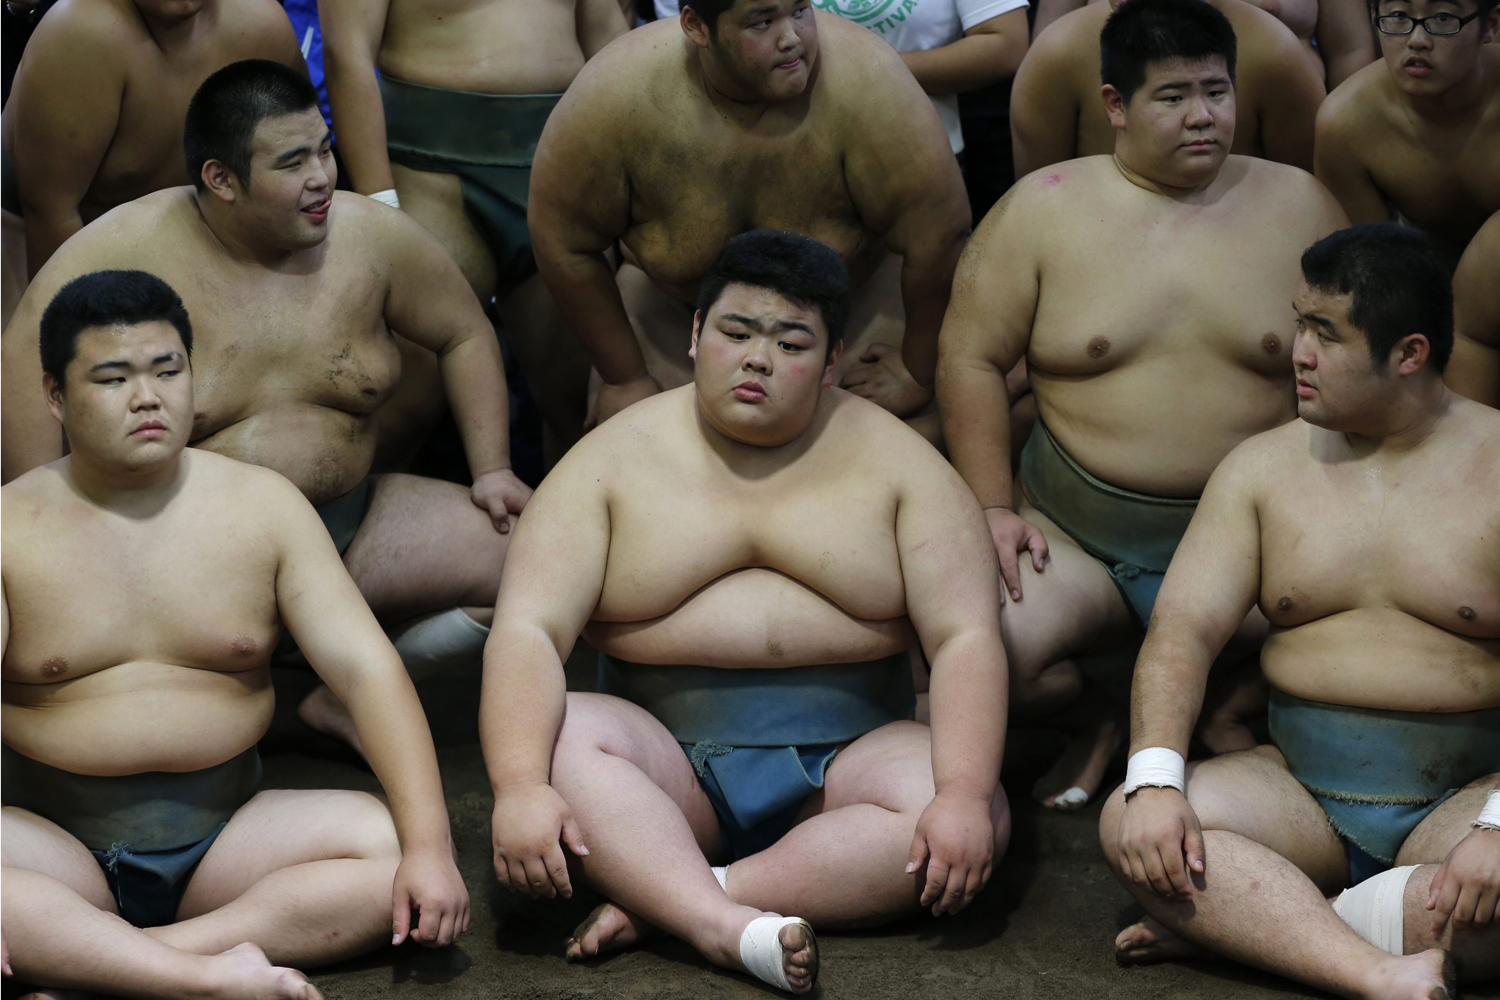 Oct. 25, 2013. Traditional sumo wrestling club members at Saitama Sakae junior and senior high school prepare for a photo session with cyclists including Tour de France winner Christopher Froome of Britain in Saitama, north of Tokyo.